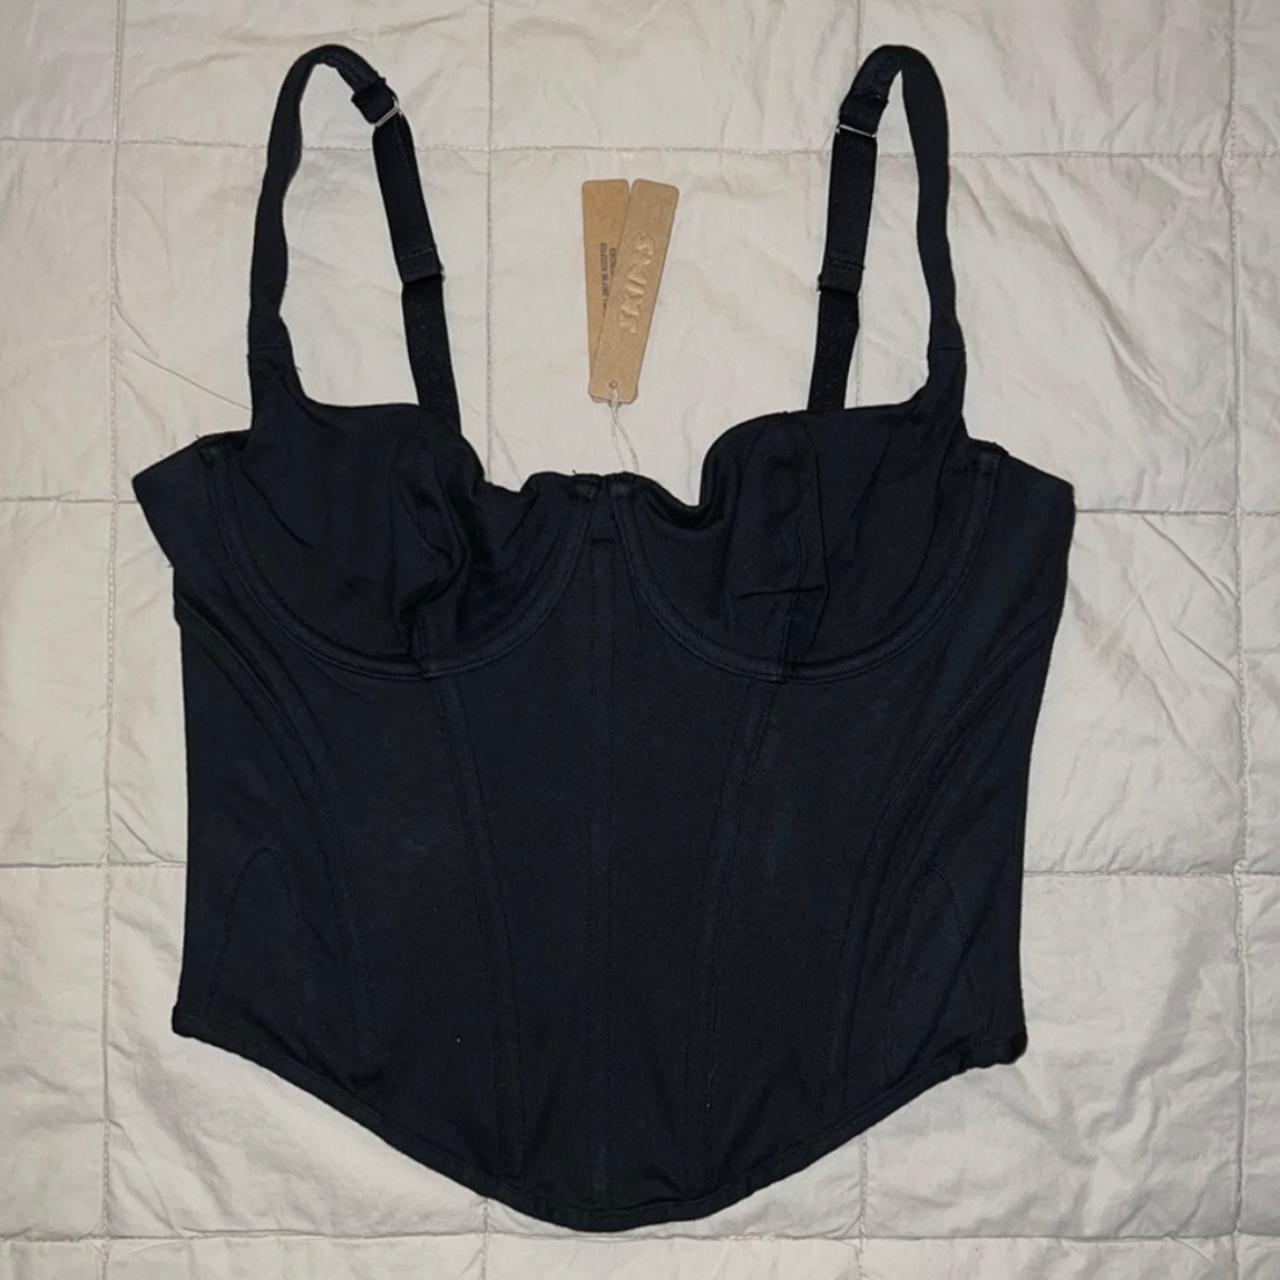 Skims cotton corset top. Color is black and it’s a